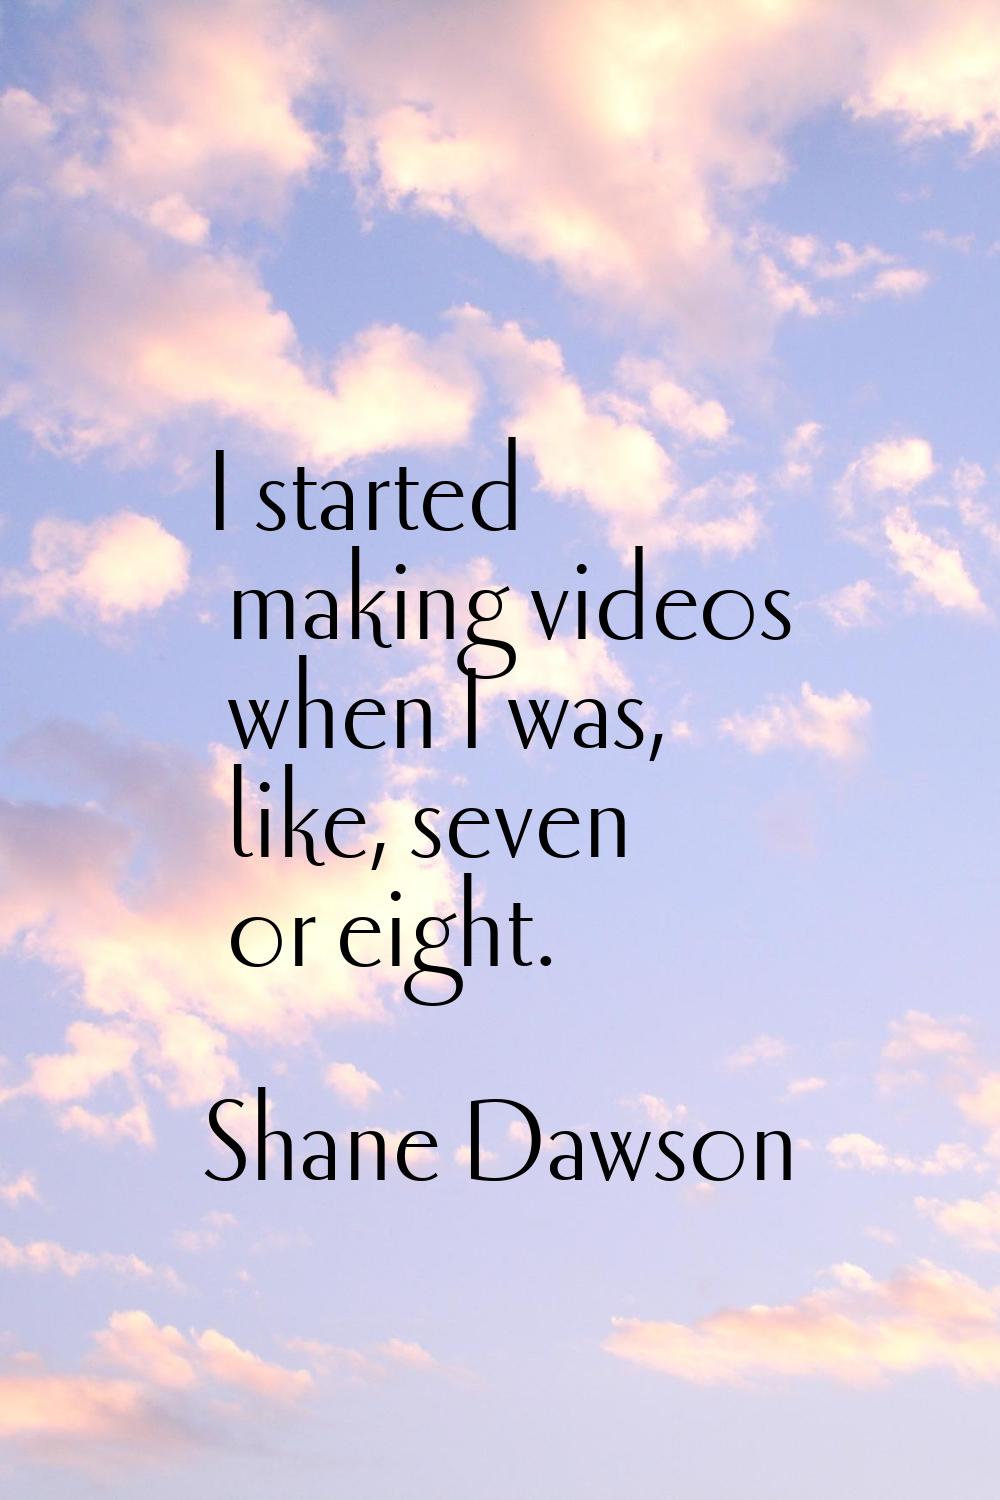 I started making videos when I was, like, seven or eight.